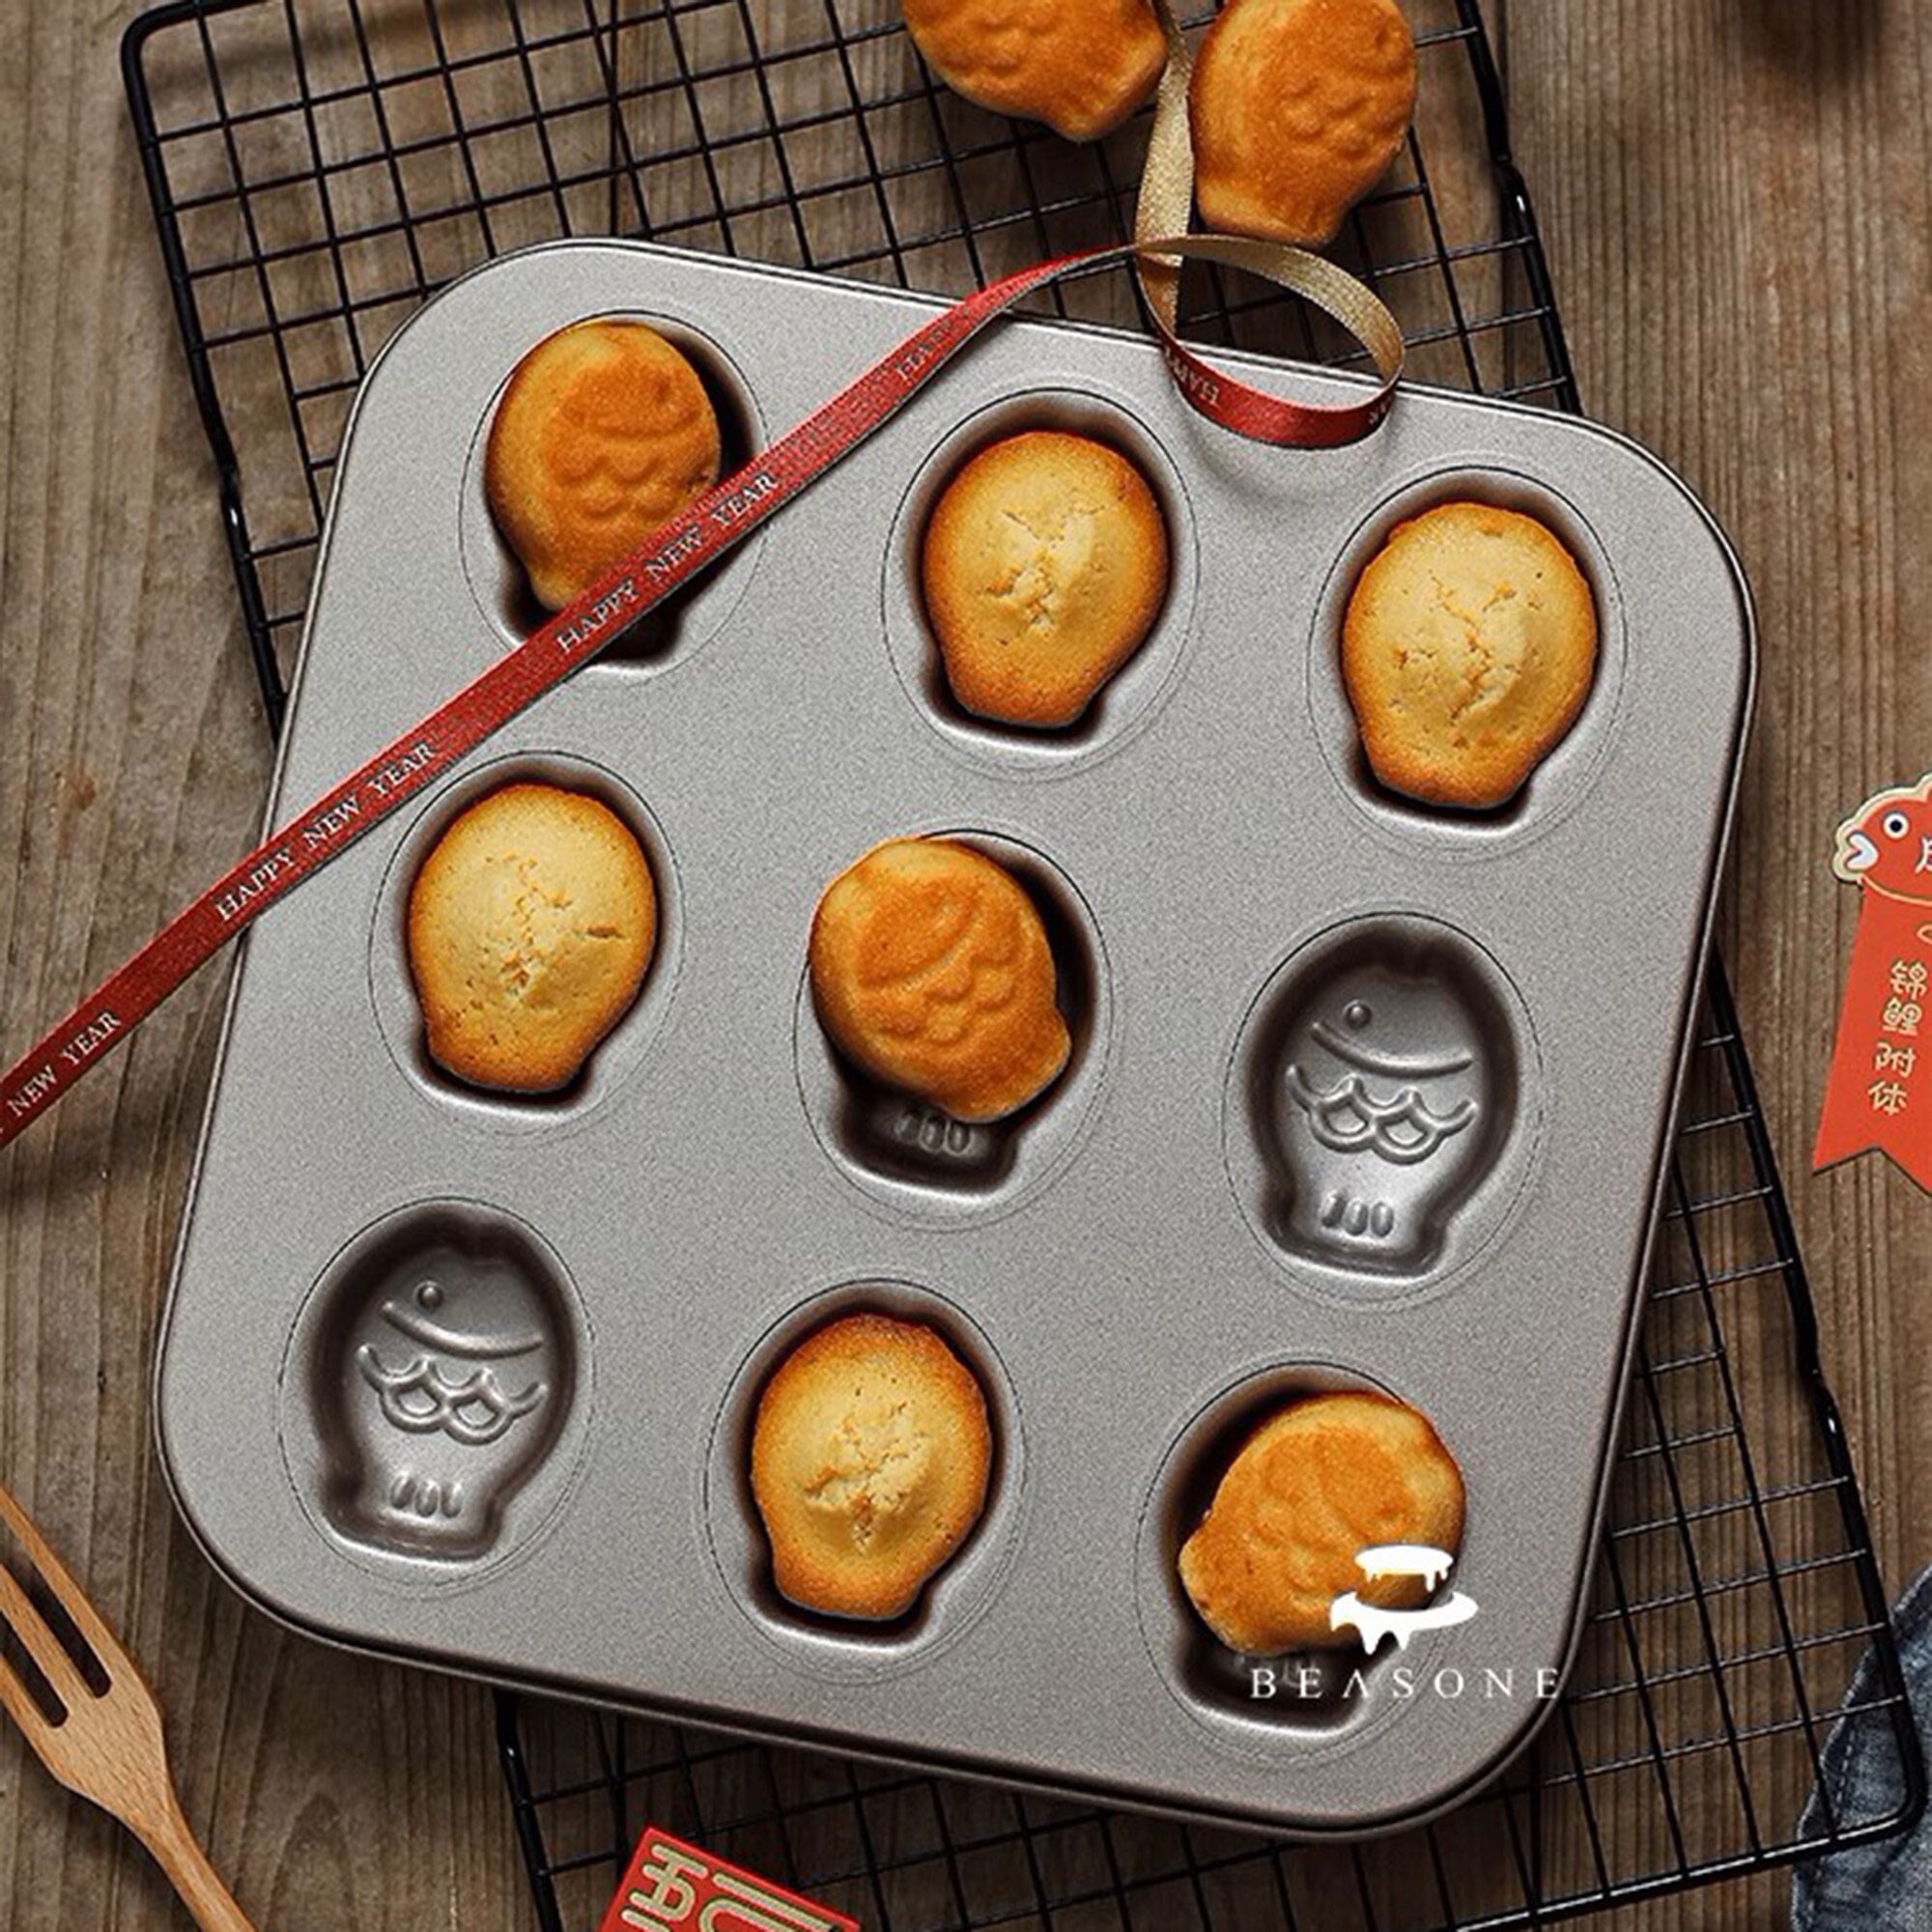  Financier Mold, Home Baking Shop Cafe Cake Baking Carbon Steel  Baking Tray, A Set of Two: Home & Kitchen